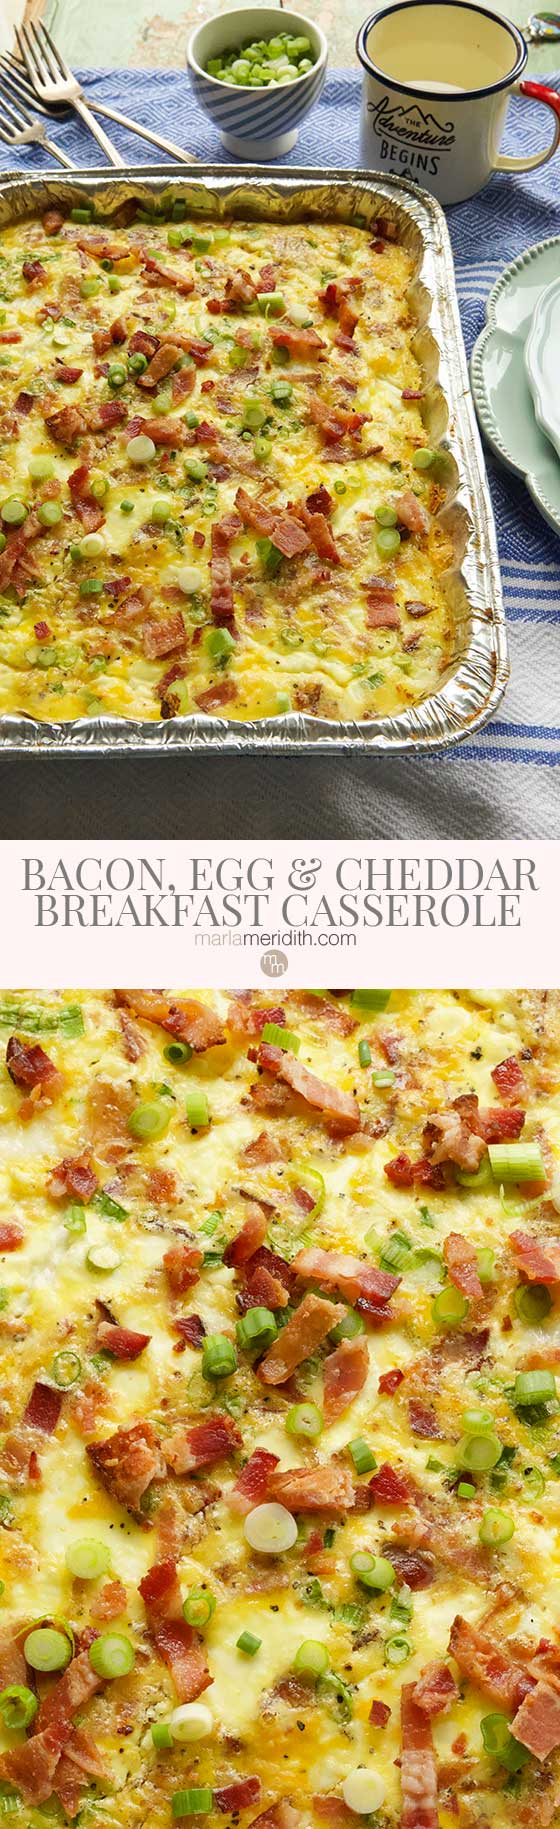 Simple and Delicious Bacon, Egg & Cheddar Cheese Breakfast Casserole recipe